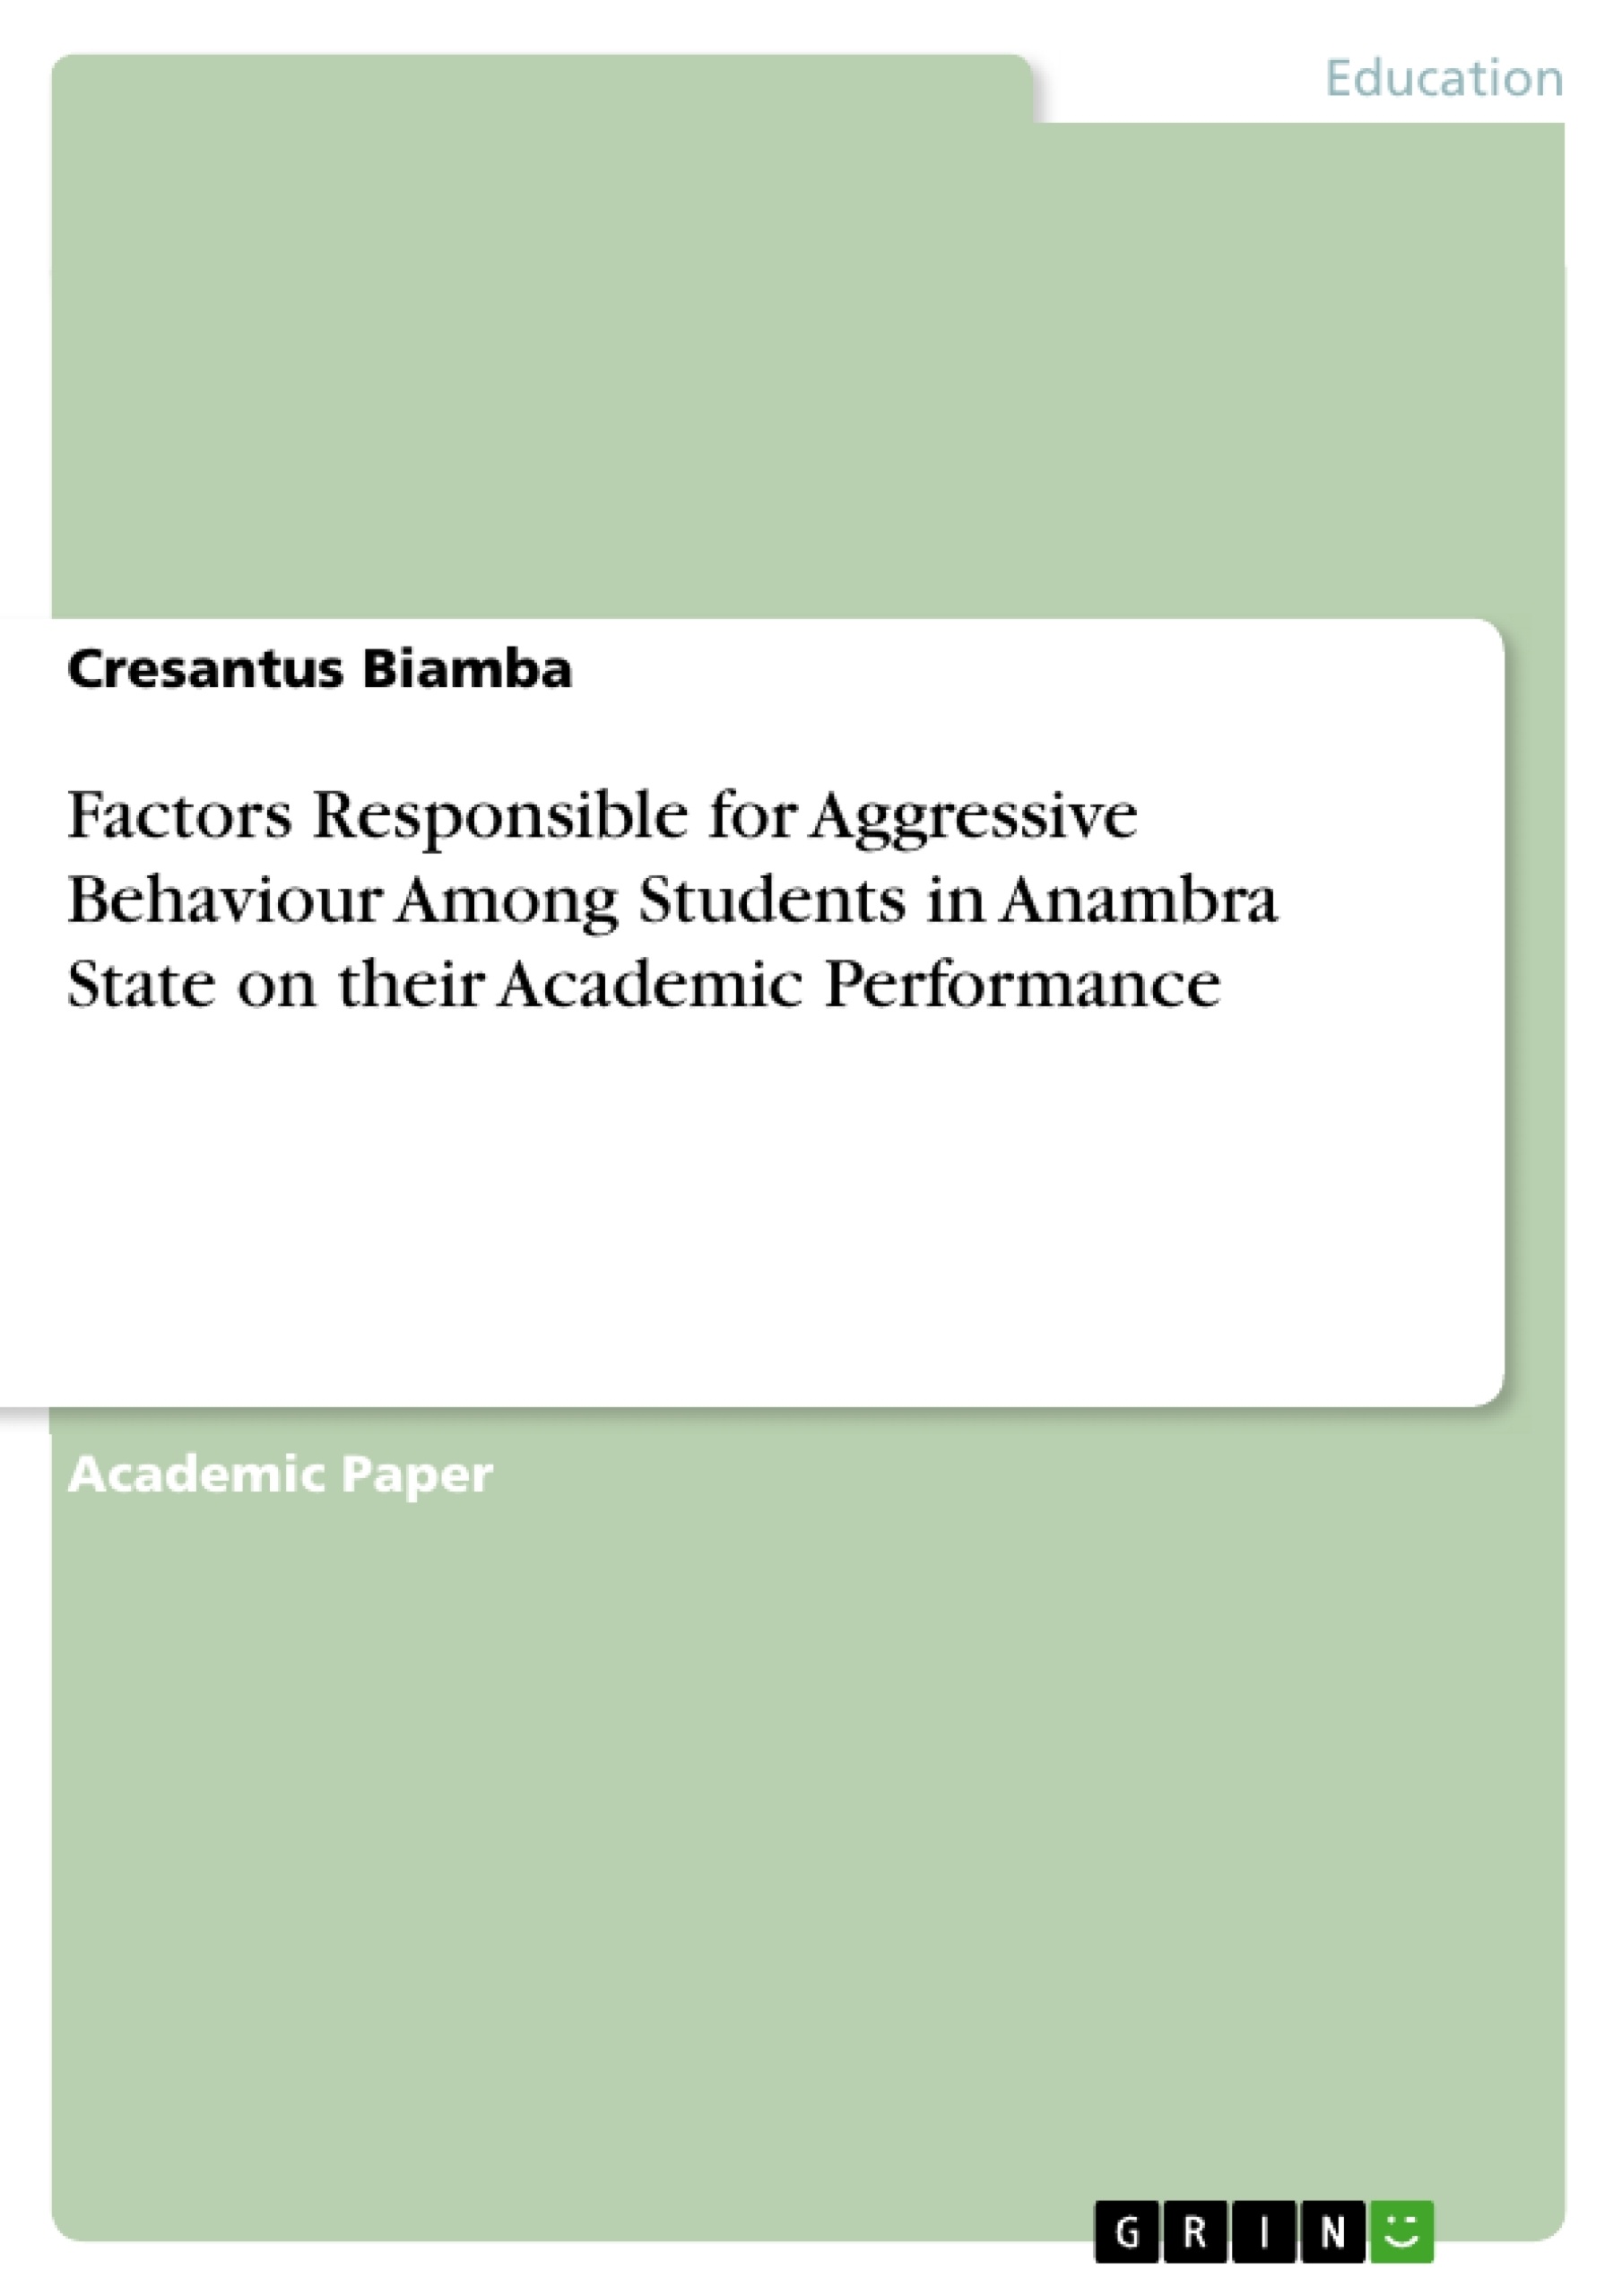 Title: Factors Responsible for Aggressive Behaviour Among Students in Anambra State on their Academic Performance